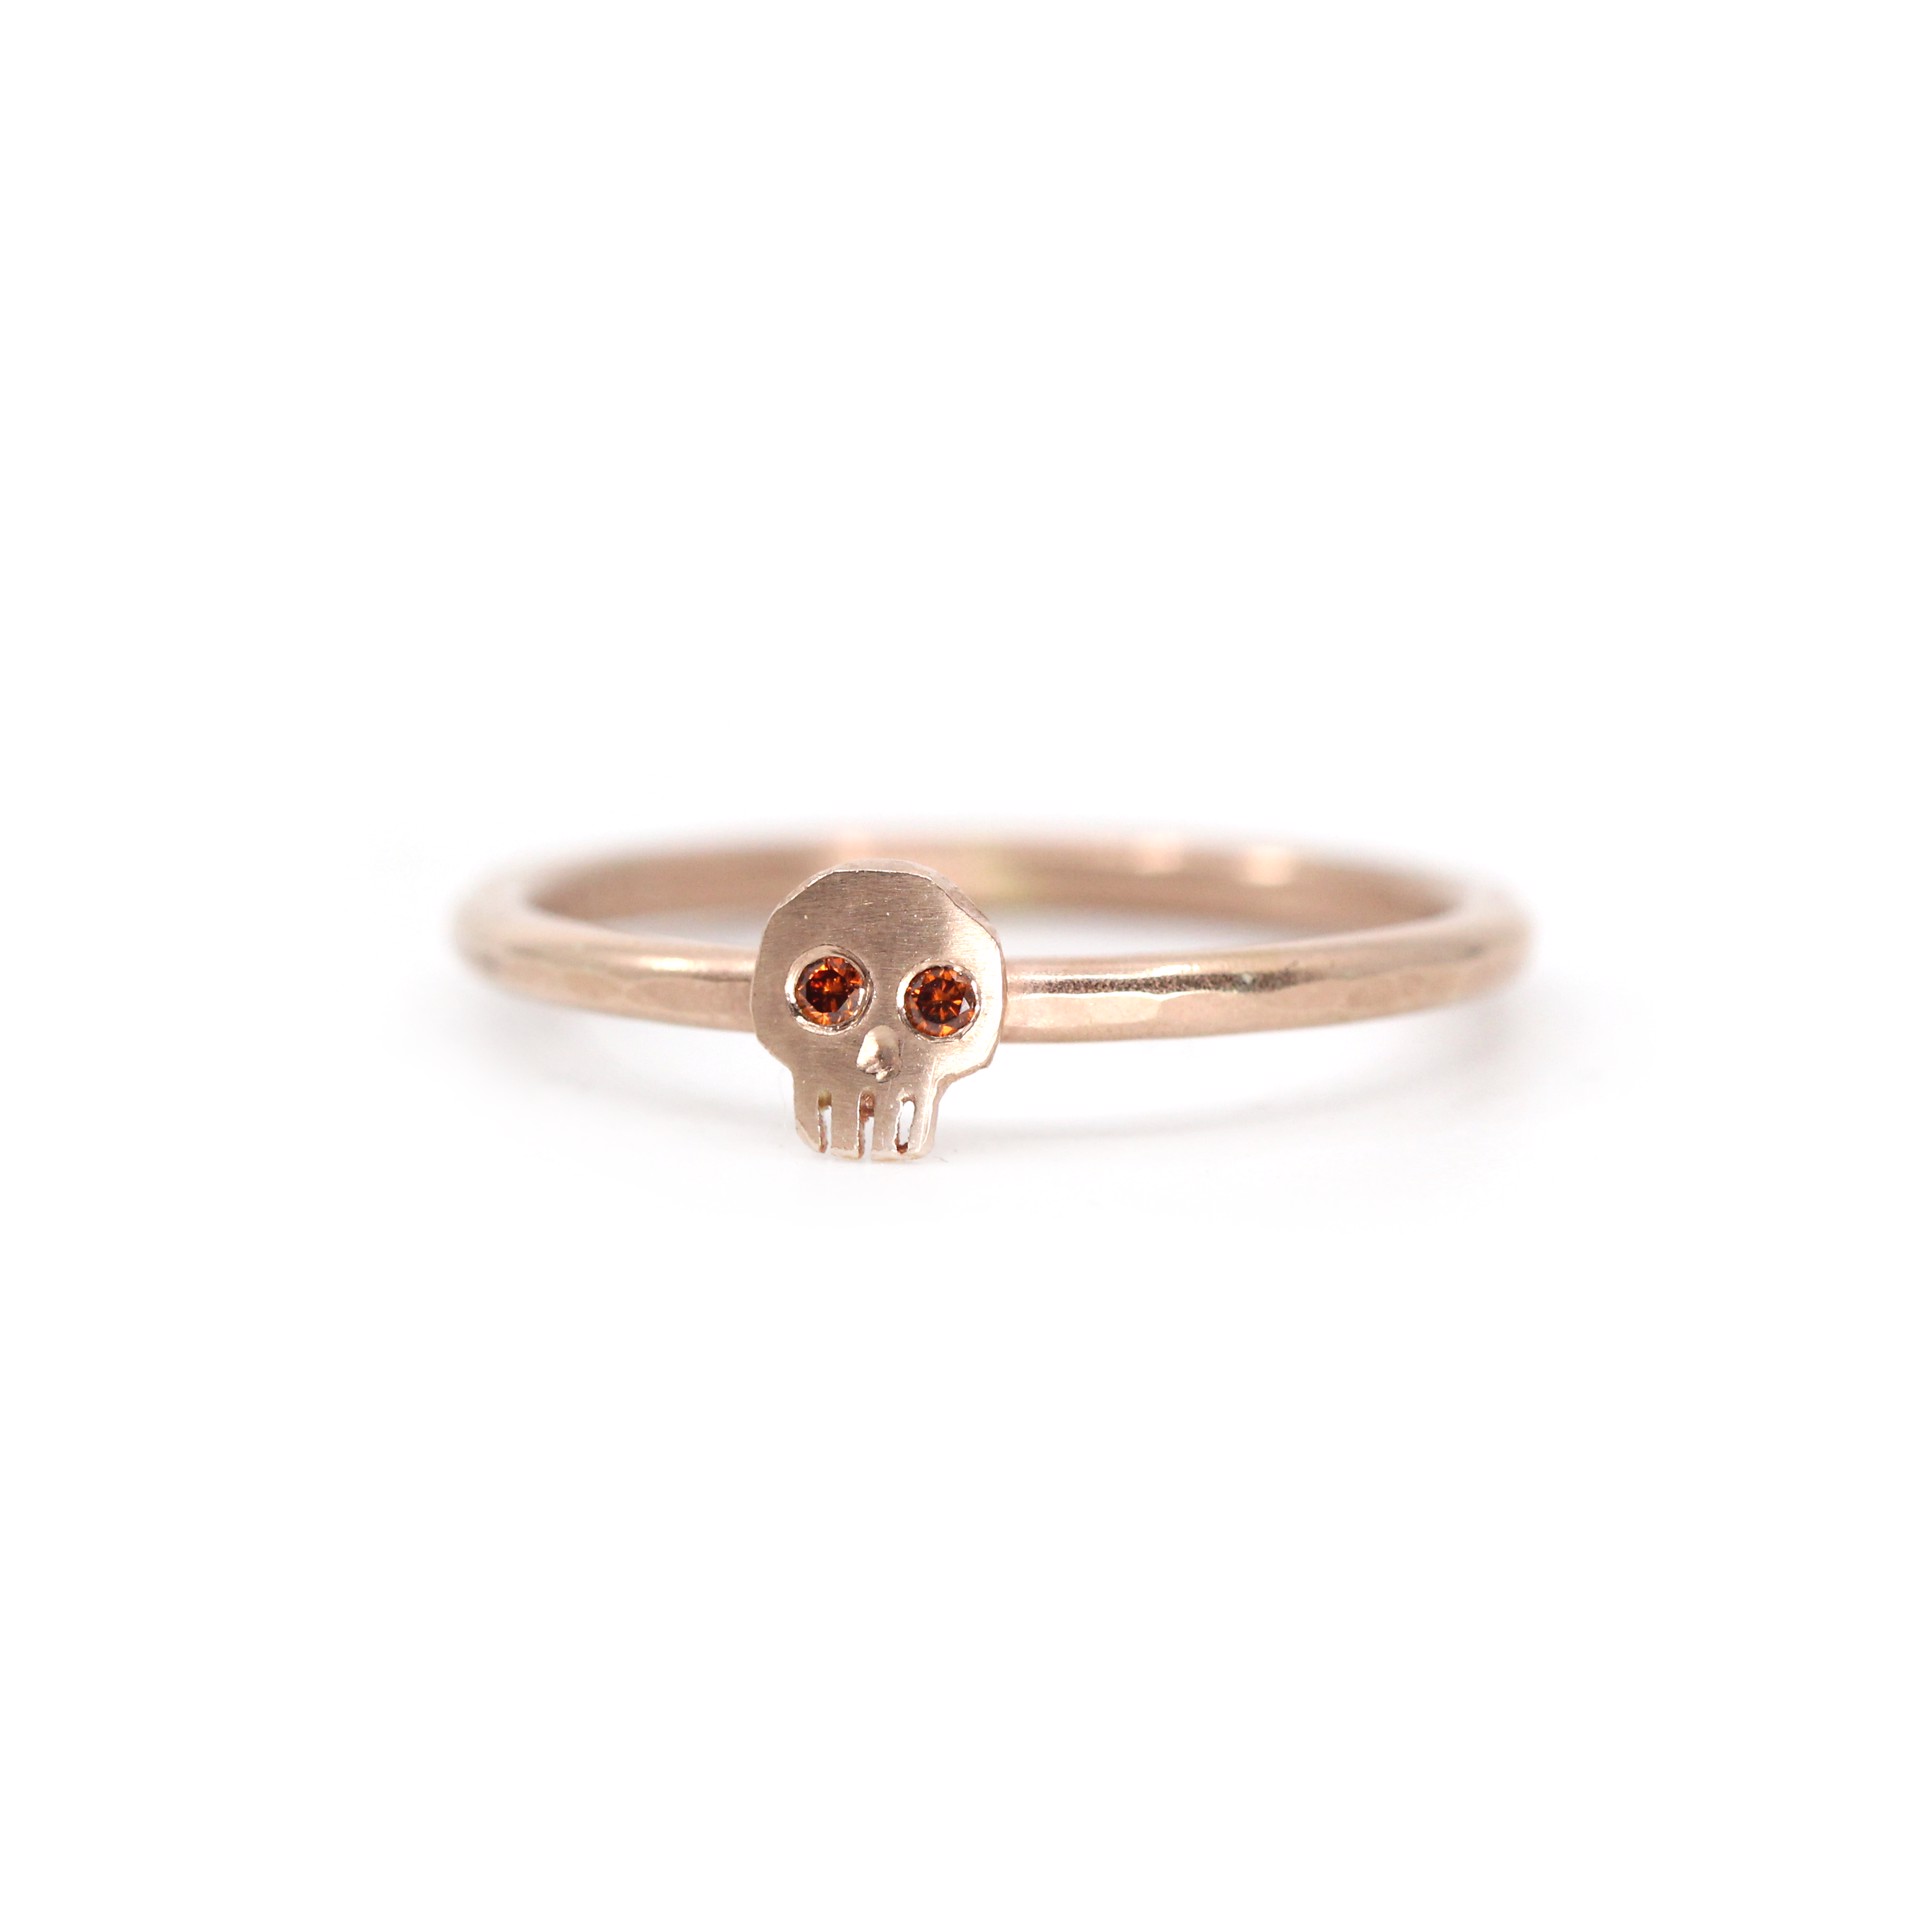 Single Skull Ring  (size 7.25) by Susan Elnora